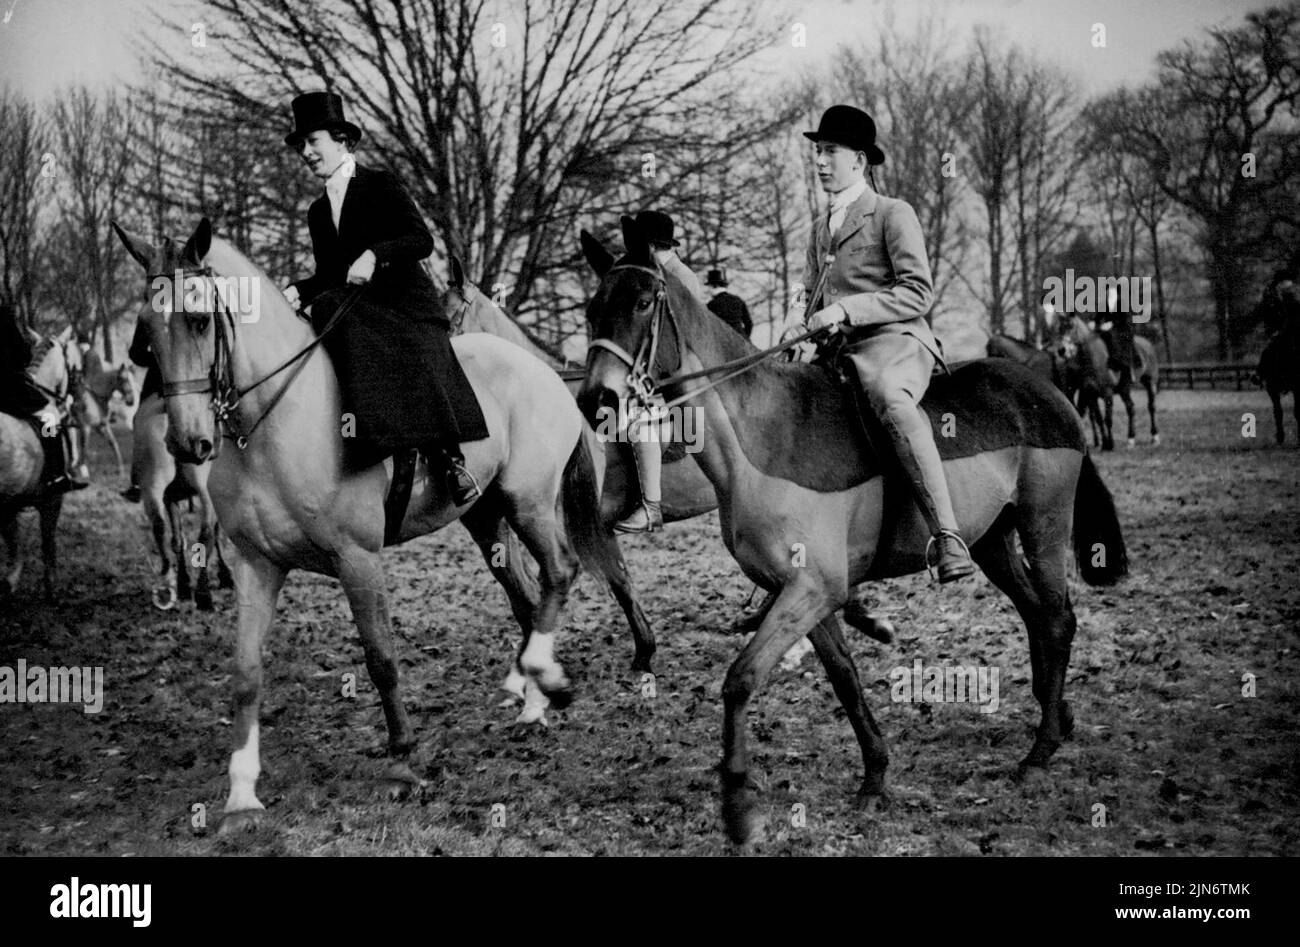 The King's Sister Hunts With Her Son -- H.R.H. The Princess Royal, only sister of King George VI., is seen riding with her elder son, Lord Lascelles when they took part in the Bramham Moor meet at Spofforth, near here today. The Princess Royal., who was formerly Princess Mary, is married to The Earl of Harewood. February 22, 1938. (Photo by Associated Press Photo). Stock Photo